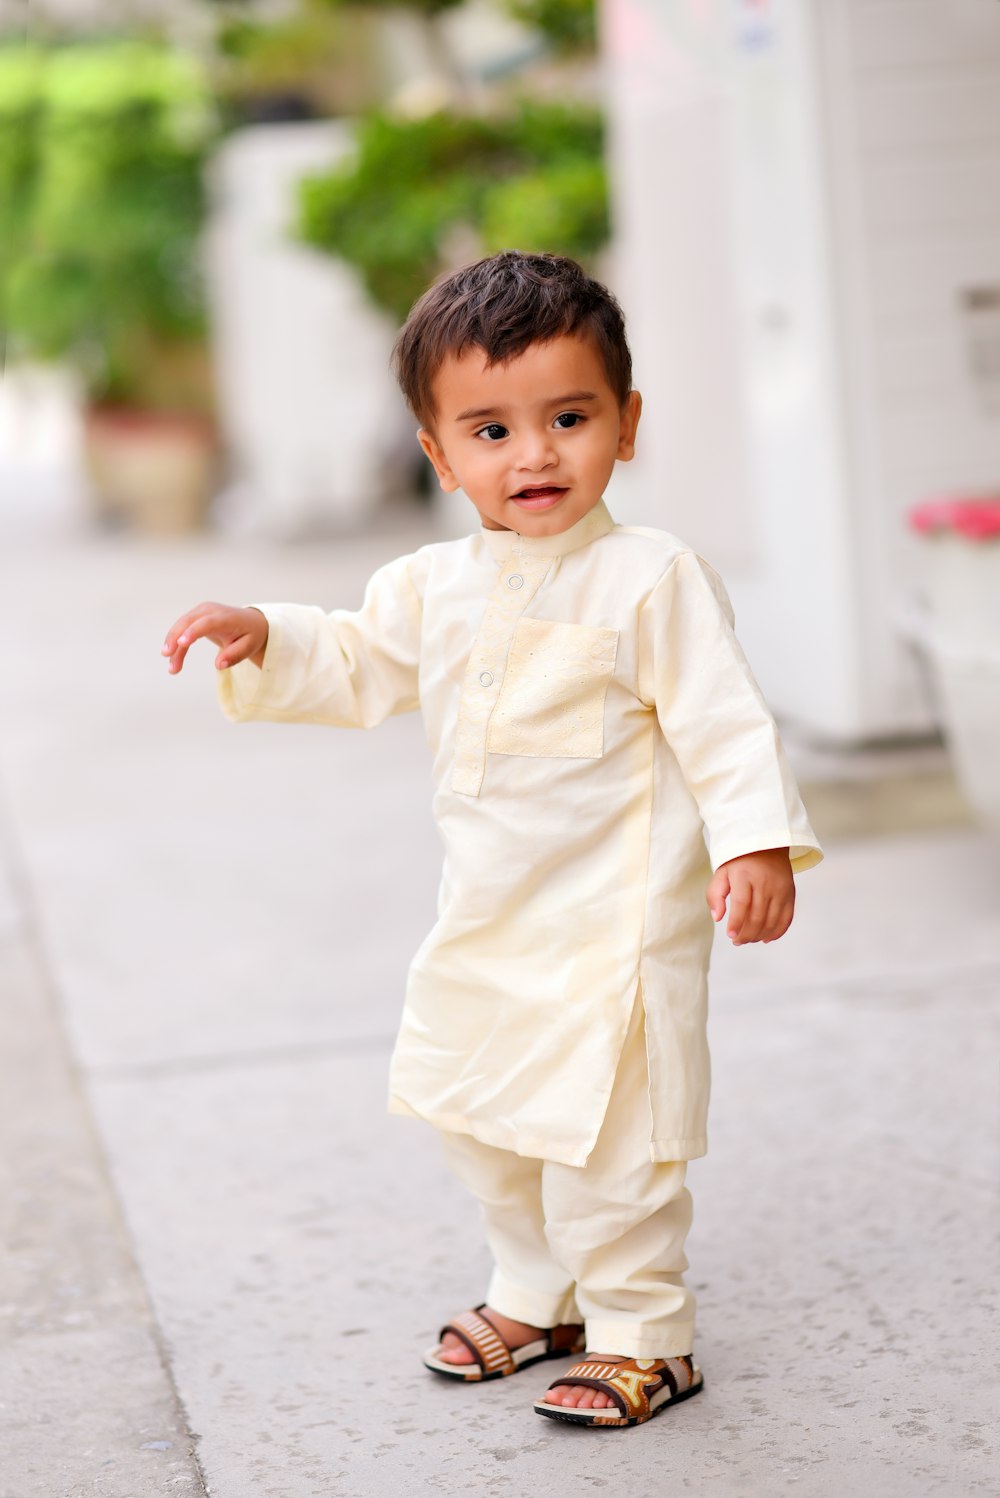 a little boy in a white outfit standing on a sidewalk